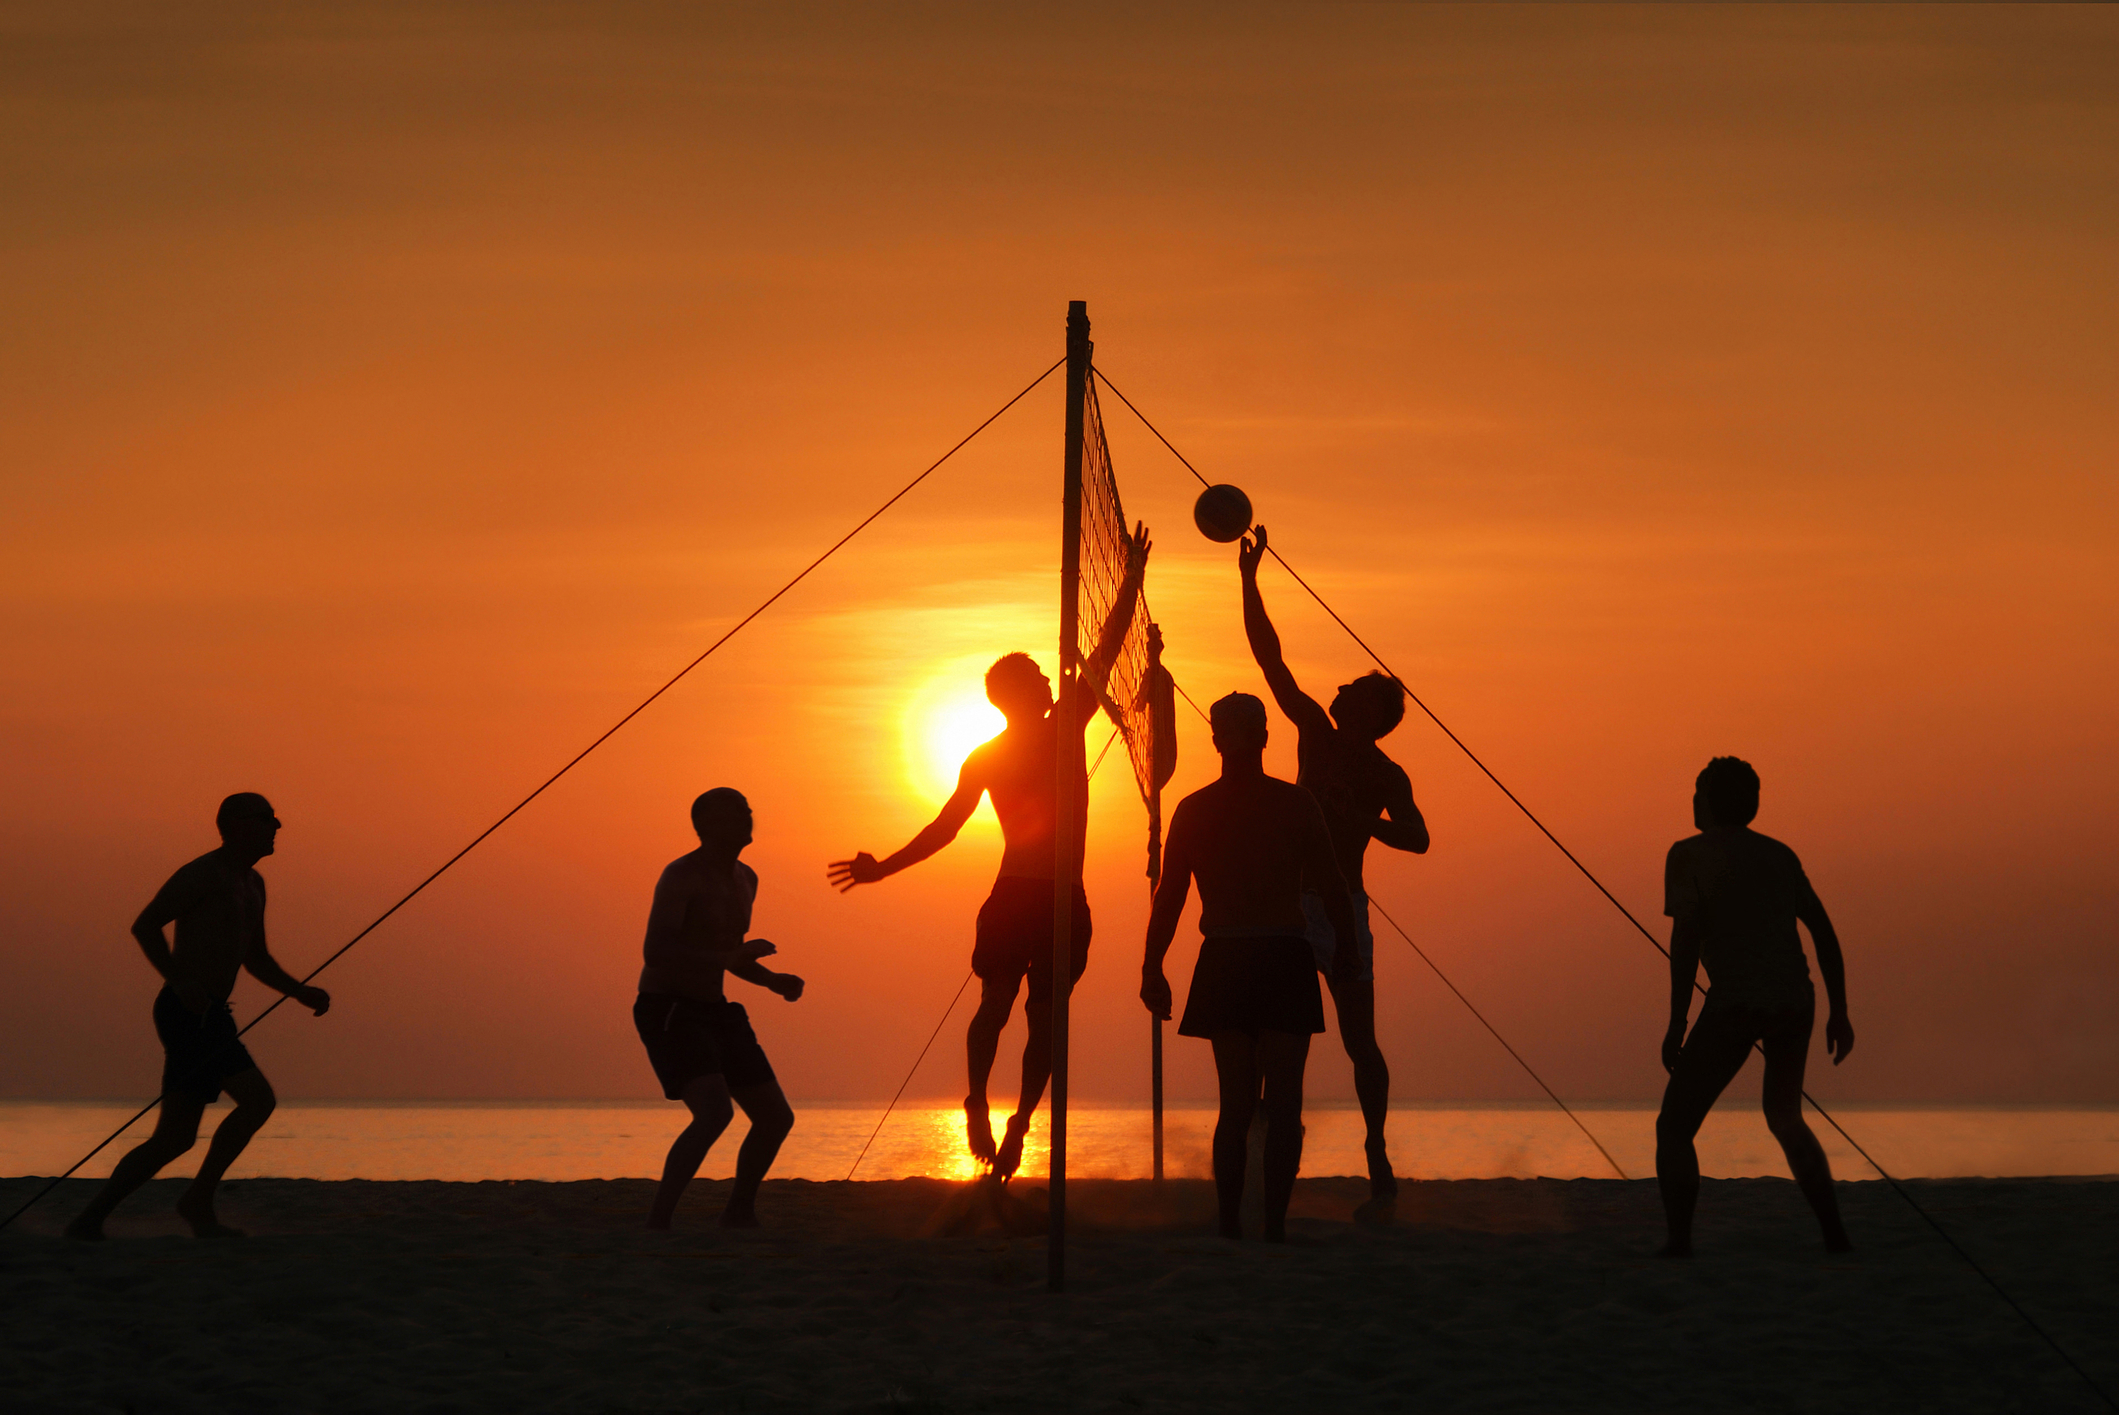 If you and your friends like outdoor activities, then beach volleyball is a perfect sport.